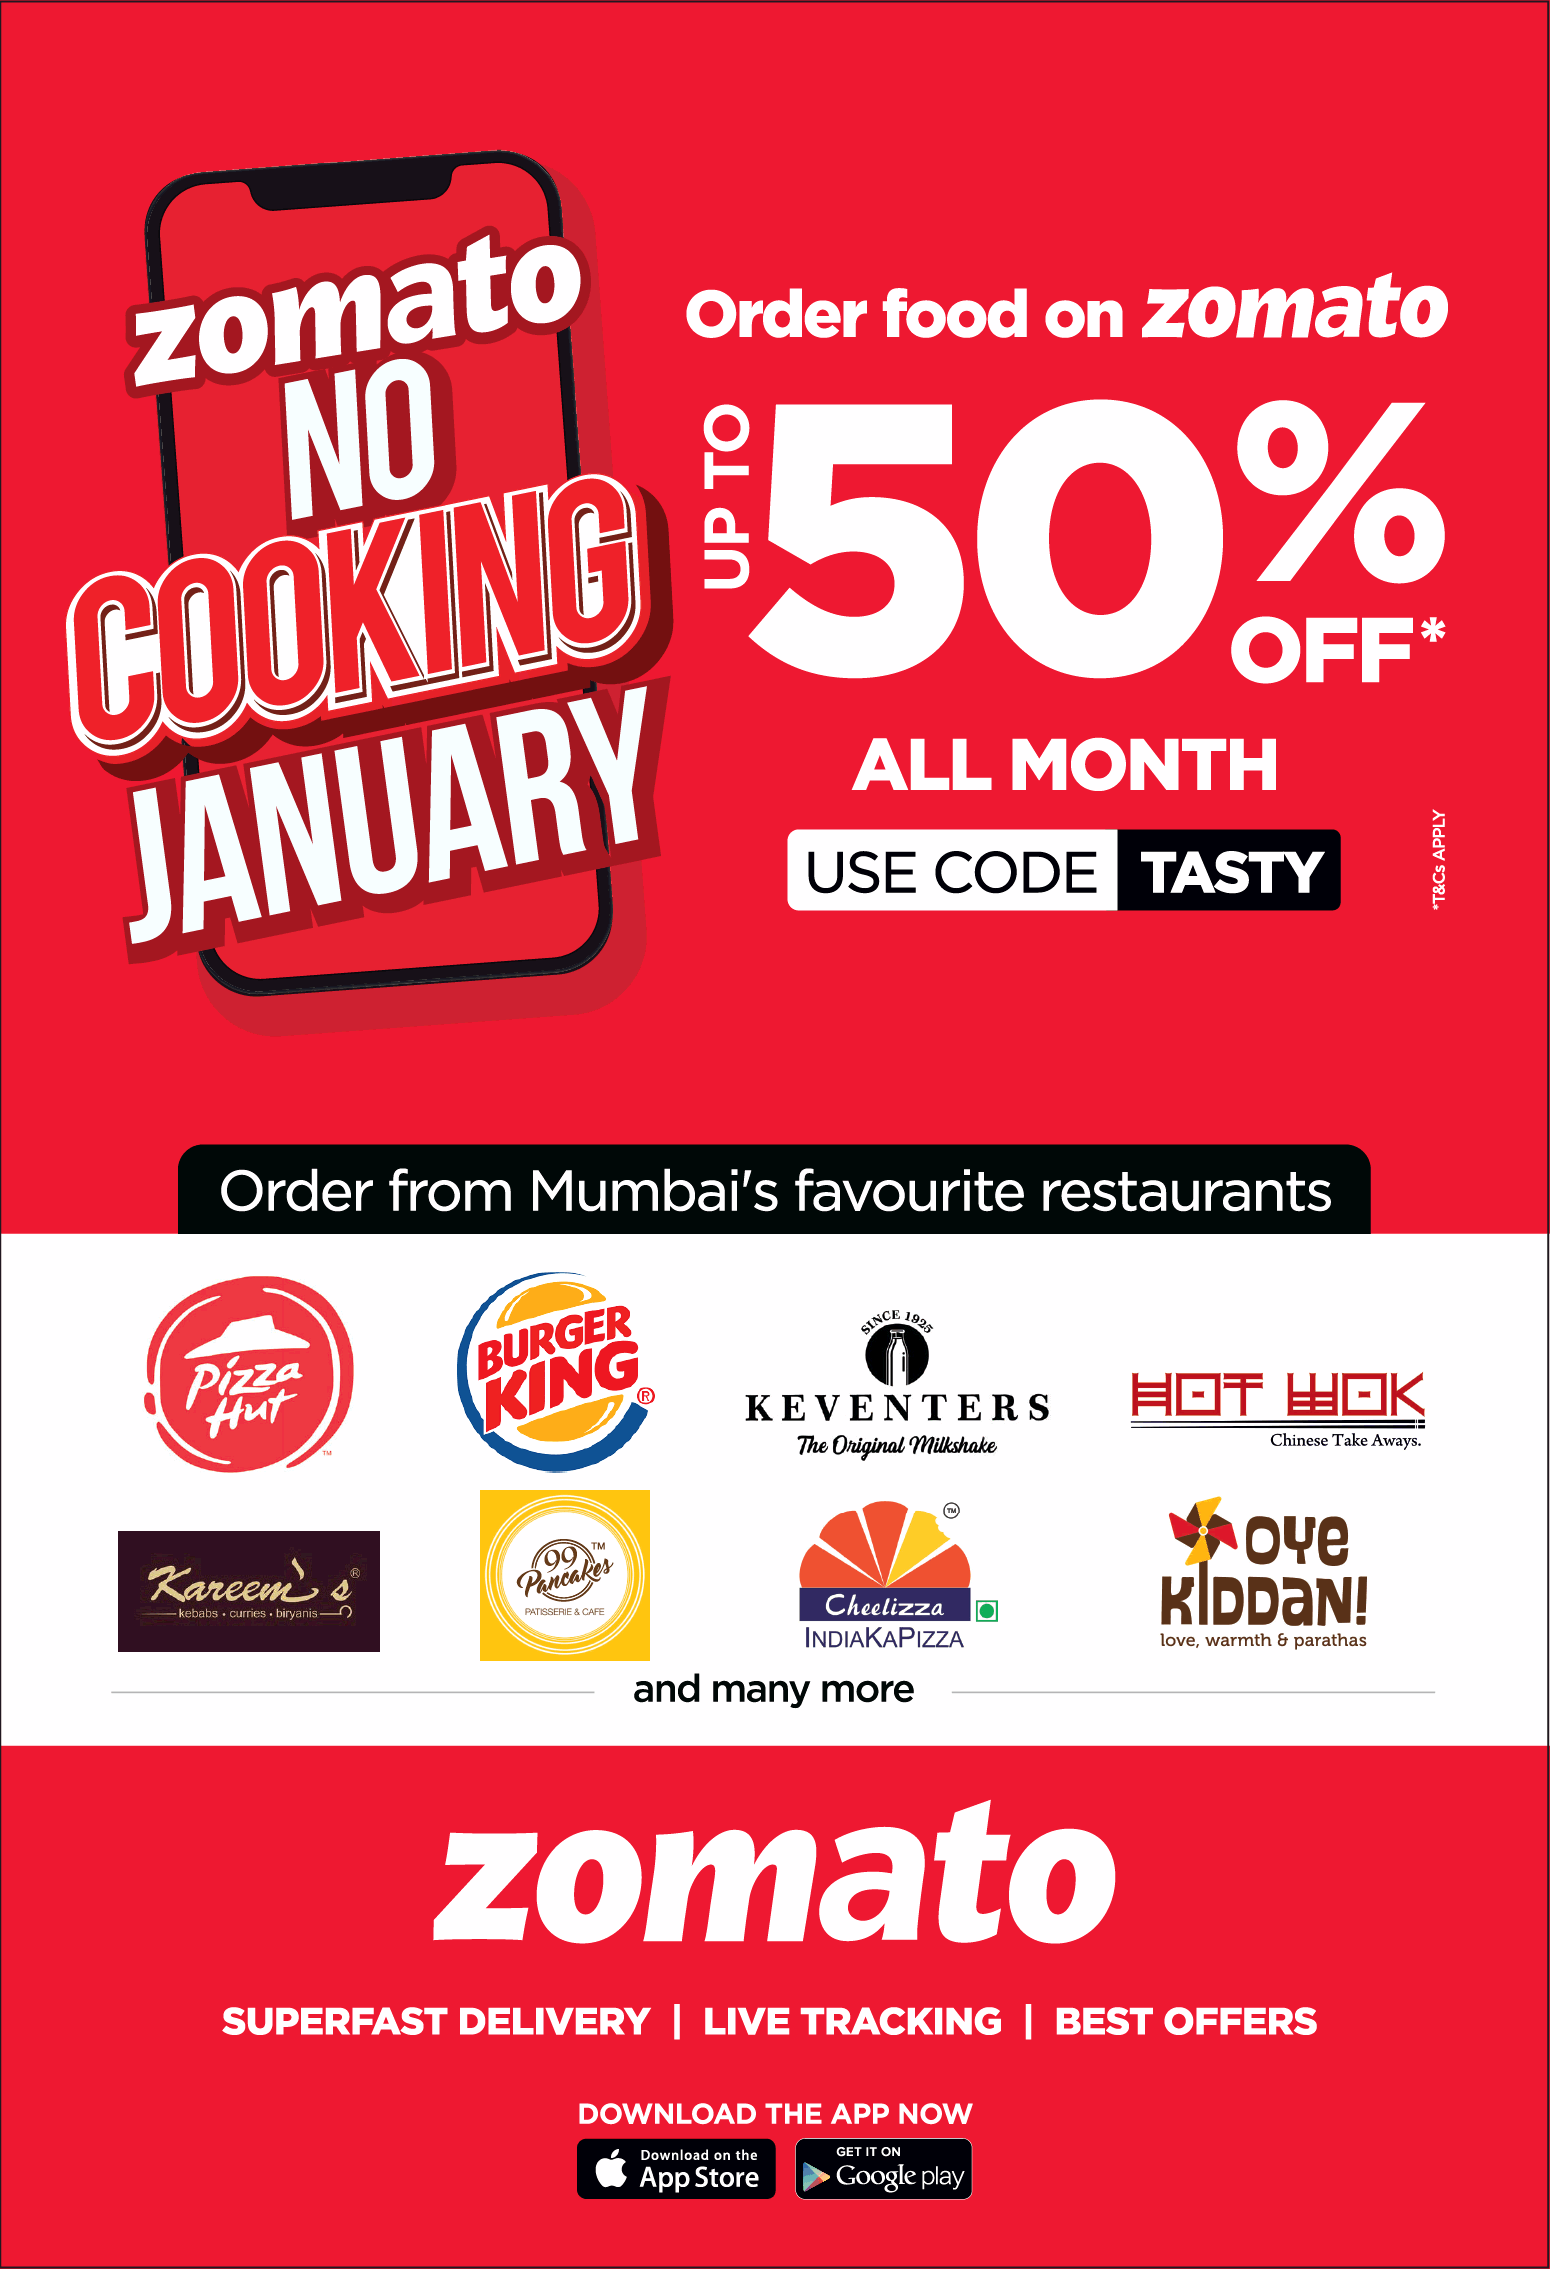 Zomato Order Food On Zomato Upto 50% All Month Ad - Advert Gallery